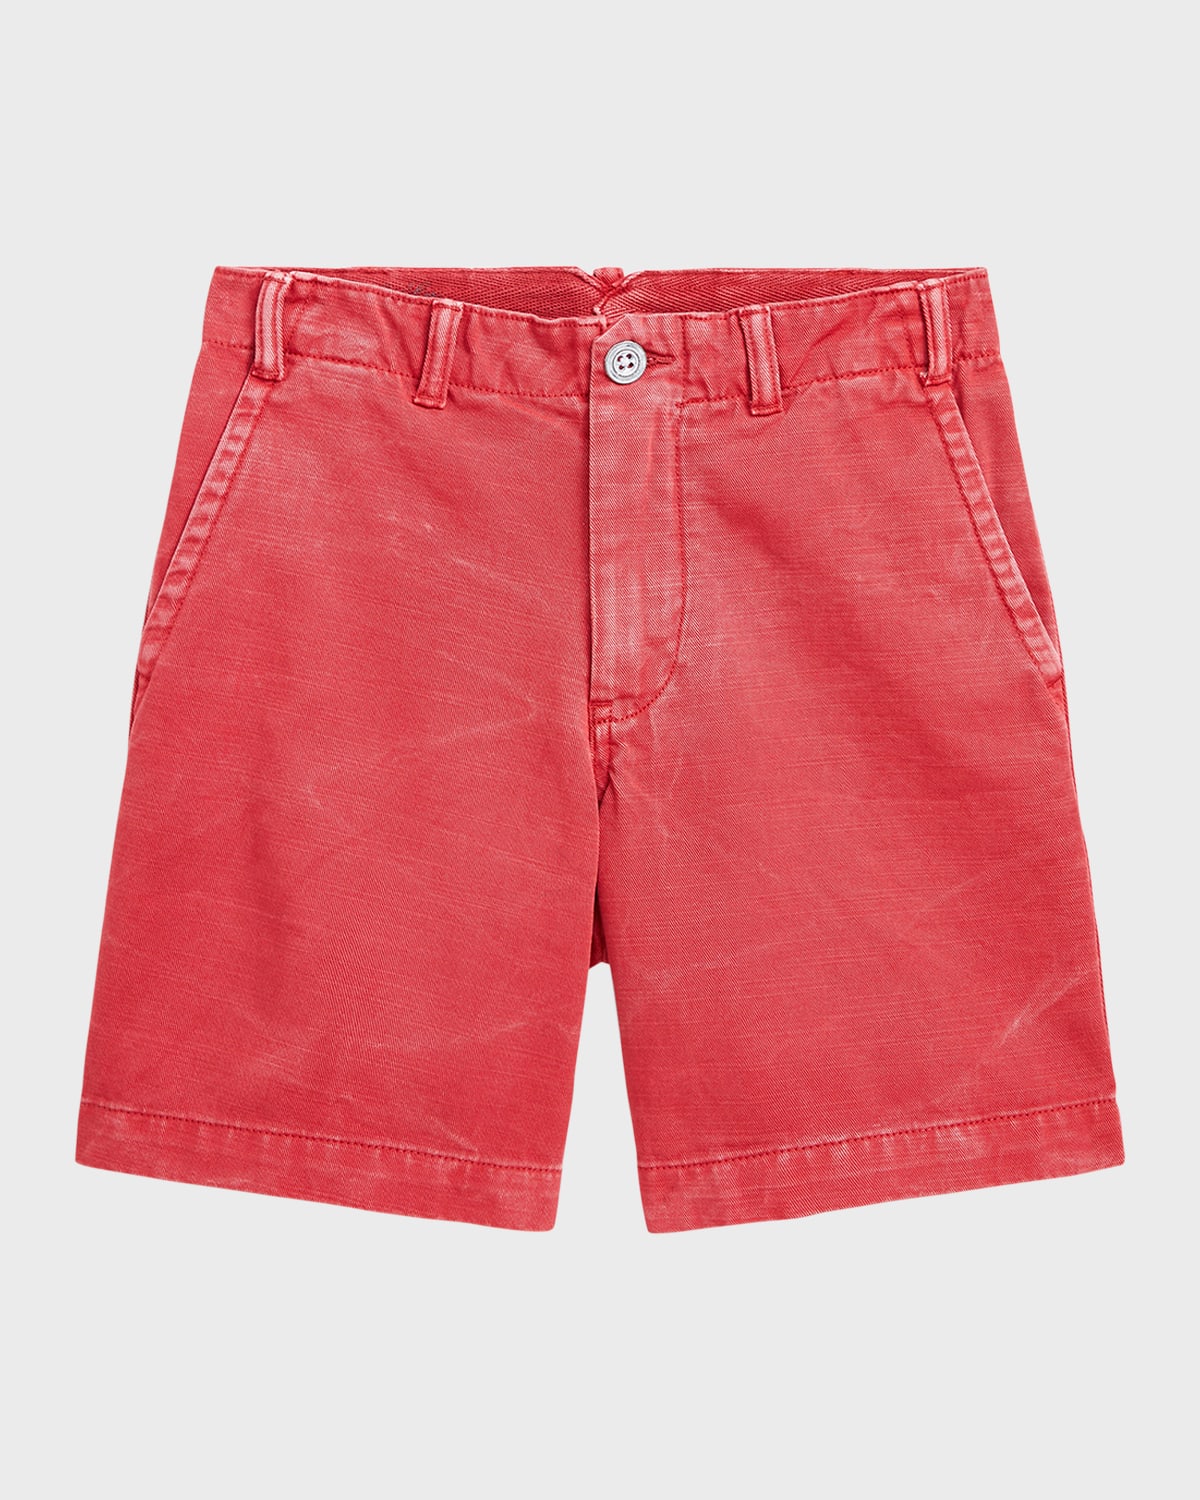 Ralph Lauren Kids' Girl's Nautical Washed Twill Shorts In Chili Pepper